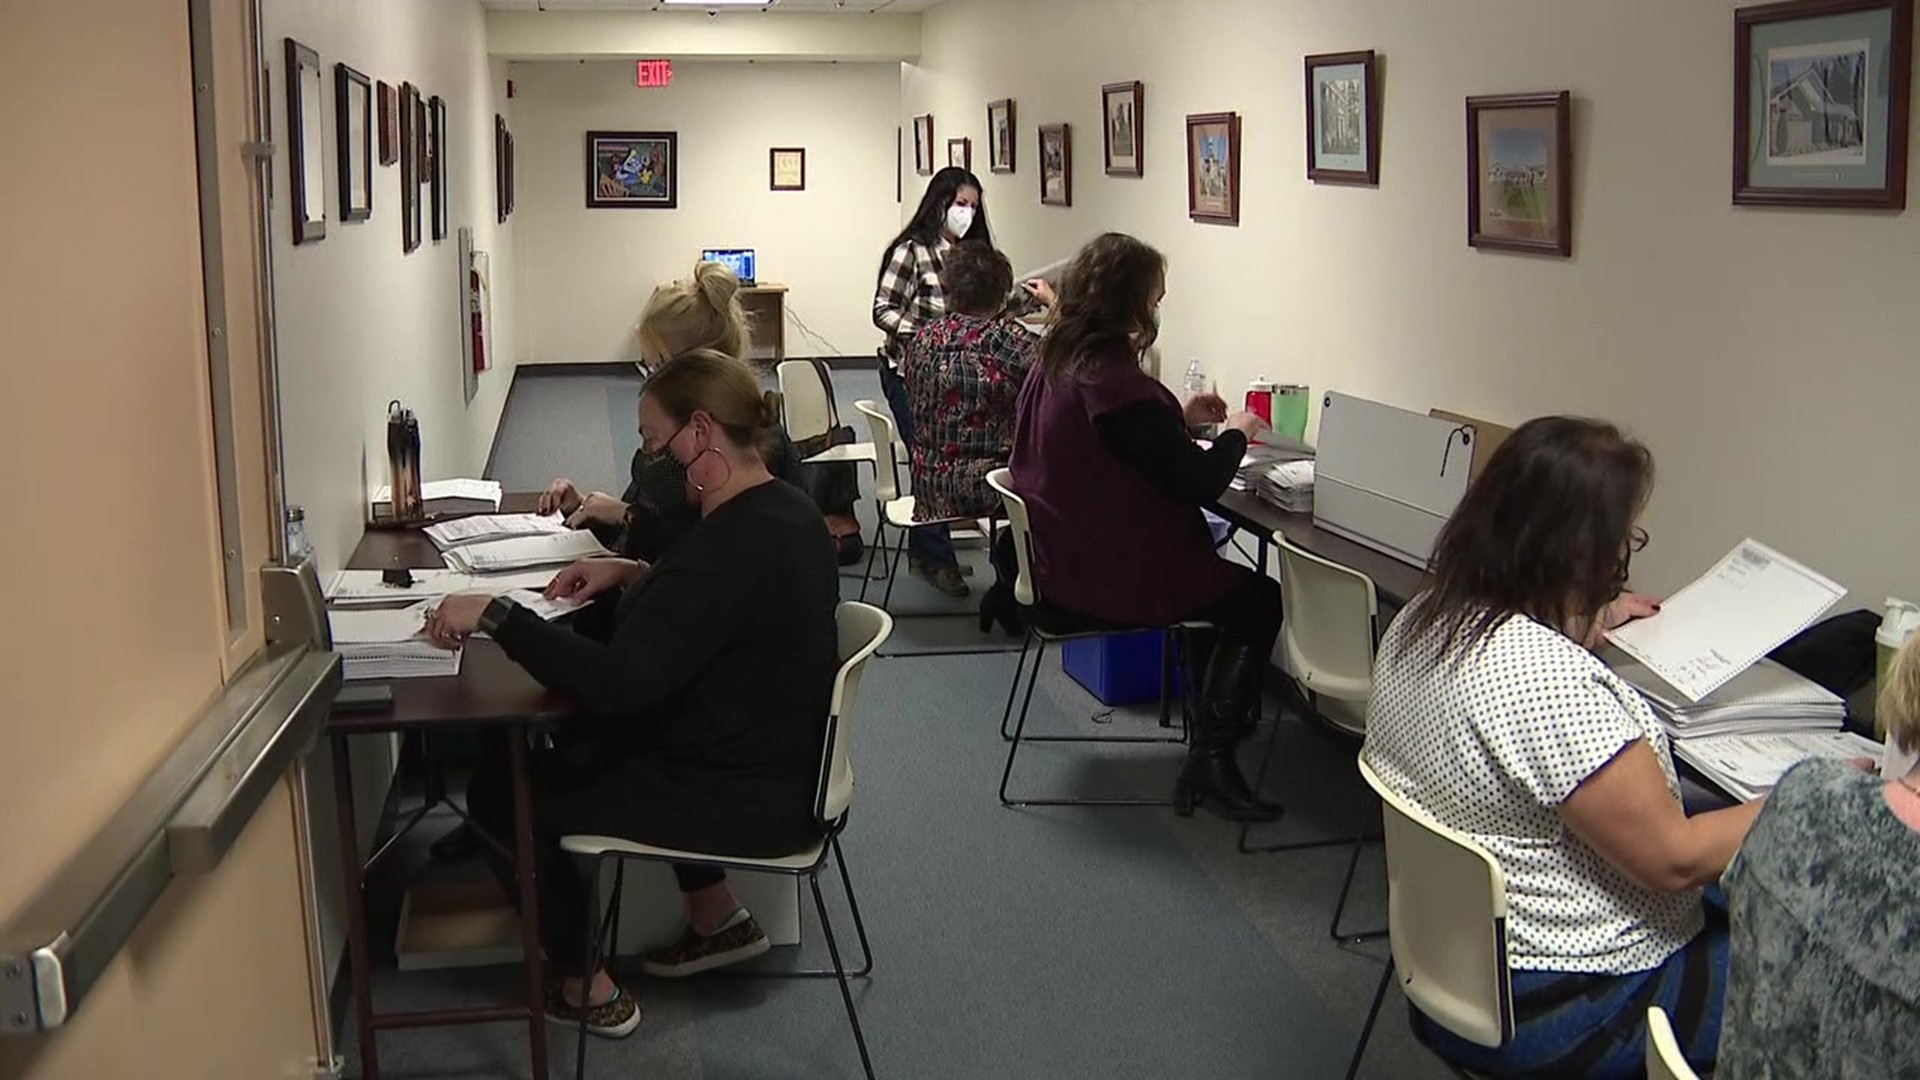 County election officials worked over two days to count more than 32,000 mail-in and absentee ballots.